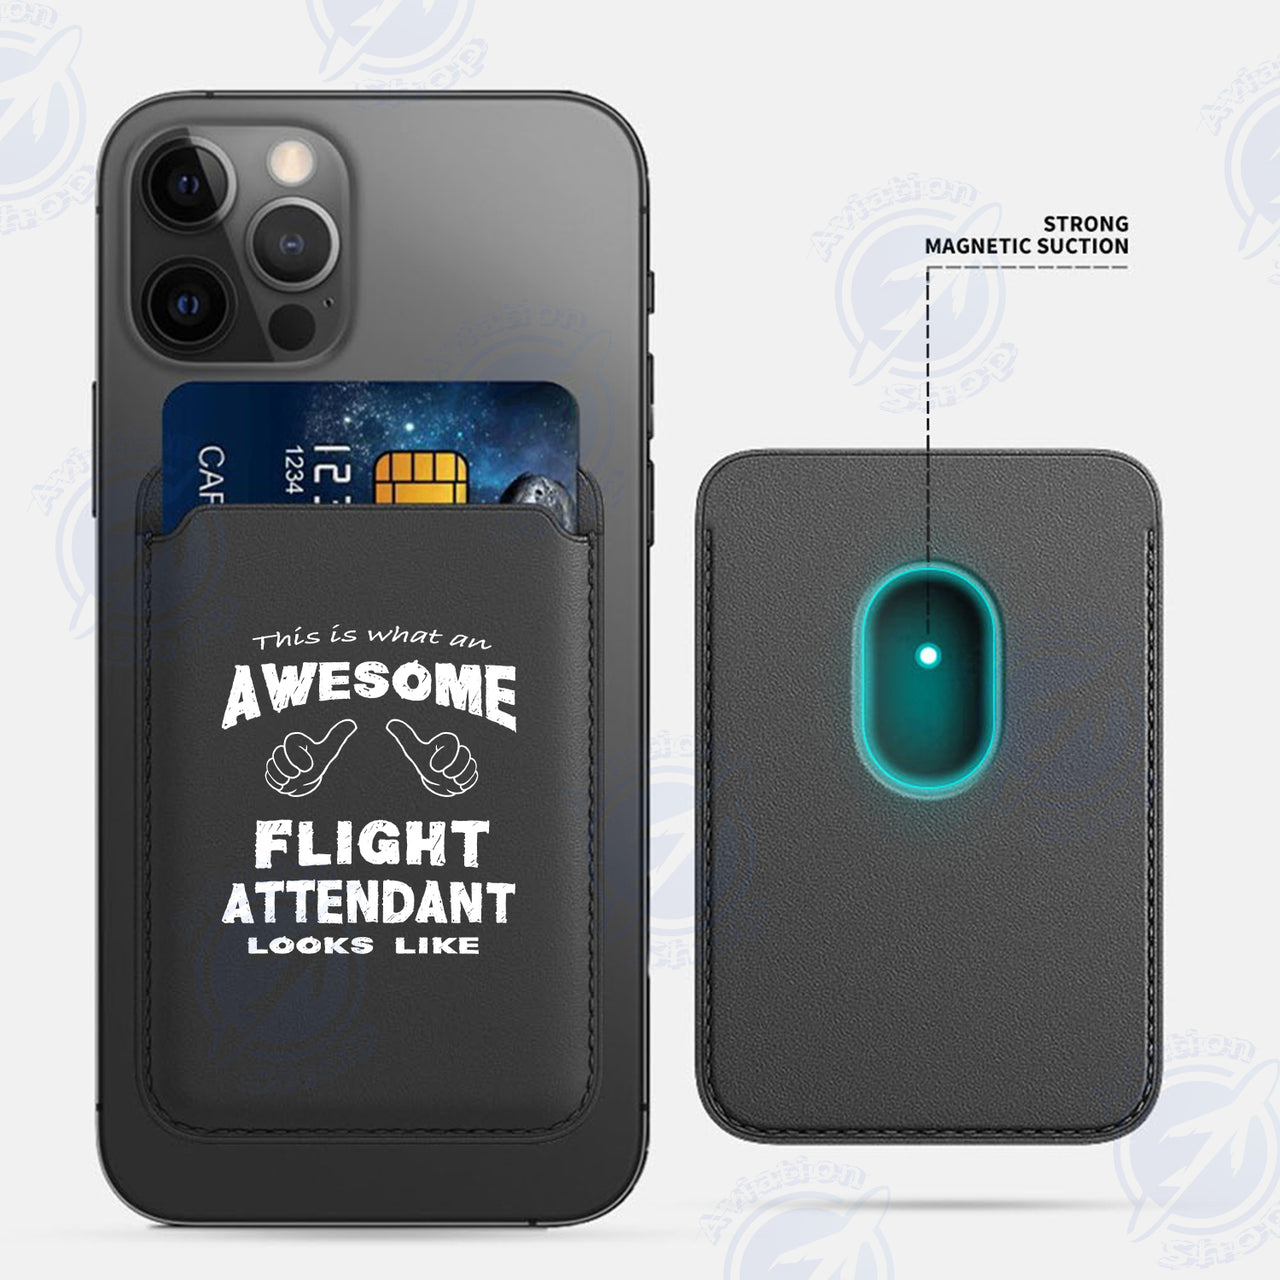 Flight Attendant iPhone Cases Magnetic Card Wallet